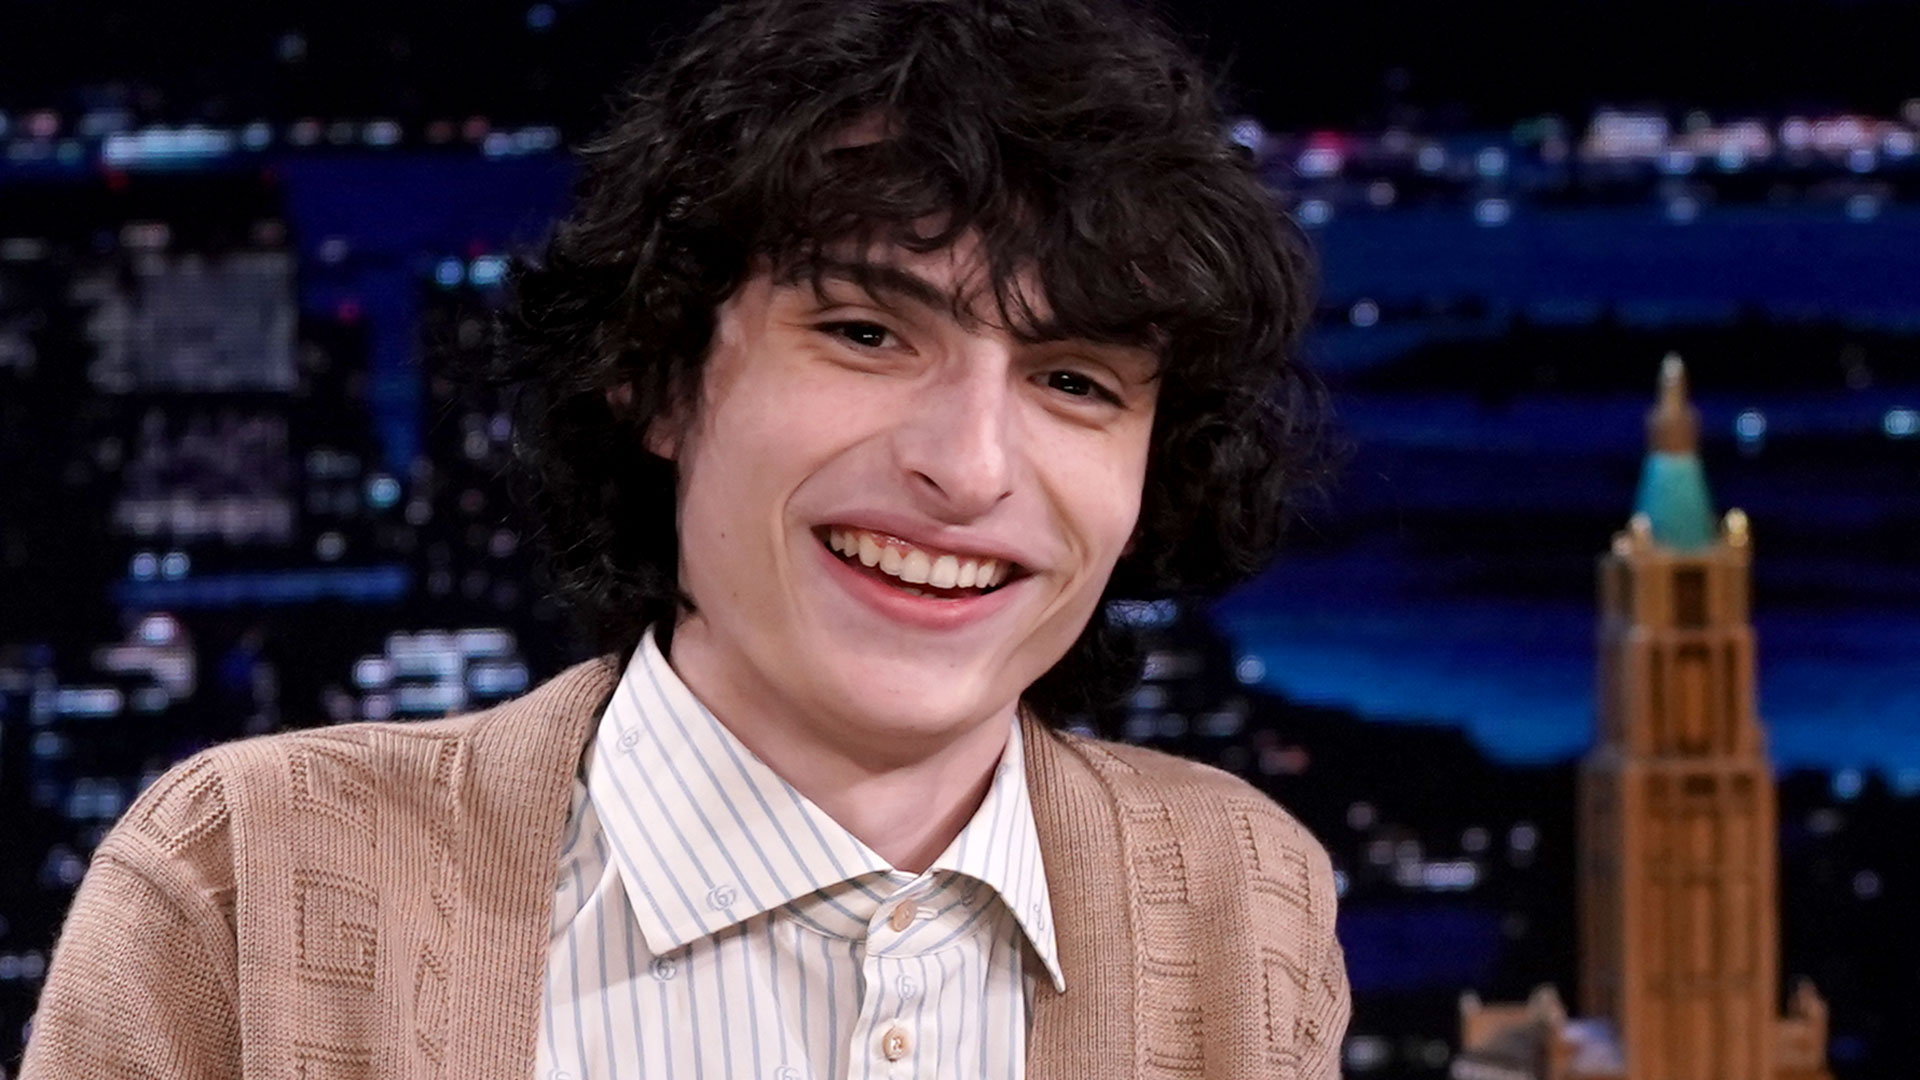 Watch The Tonight Show Starring Jimmy Fallon Highlight: Finn Wolfhard Spills the Tea on Hopper's Fate and Eleven's Powers